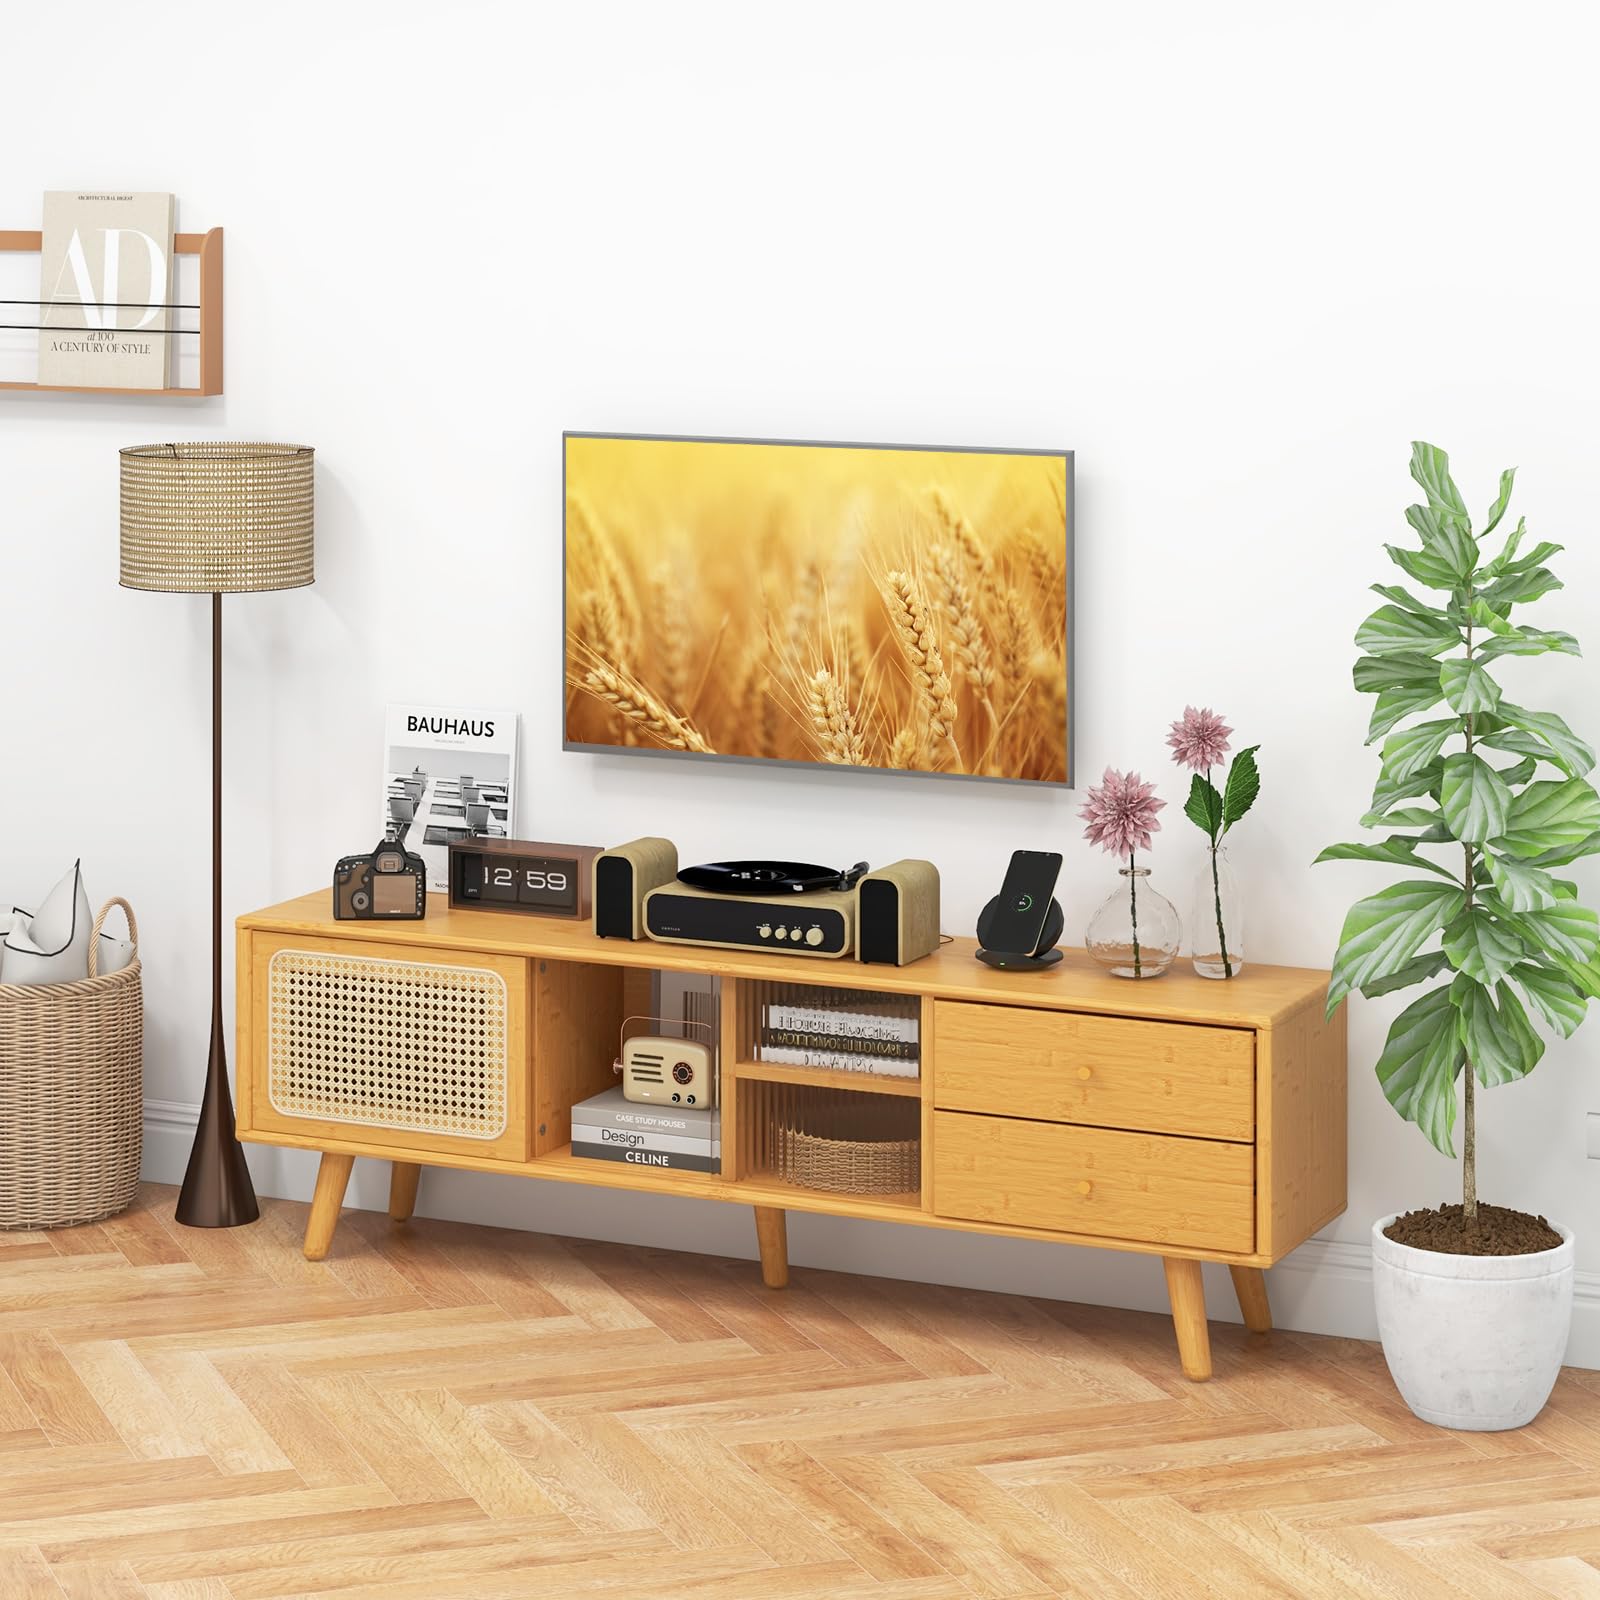 Giantex Bamboo TV Stand for 55 60 65 Inch TV, PE Rattan Entertainment Center with Sliding Doors